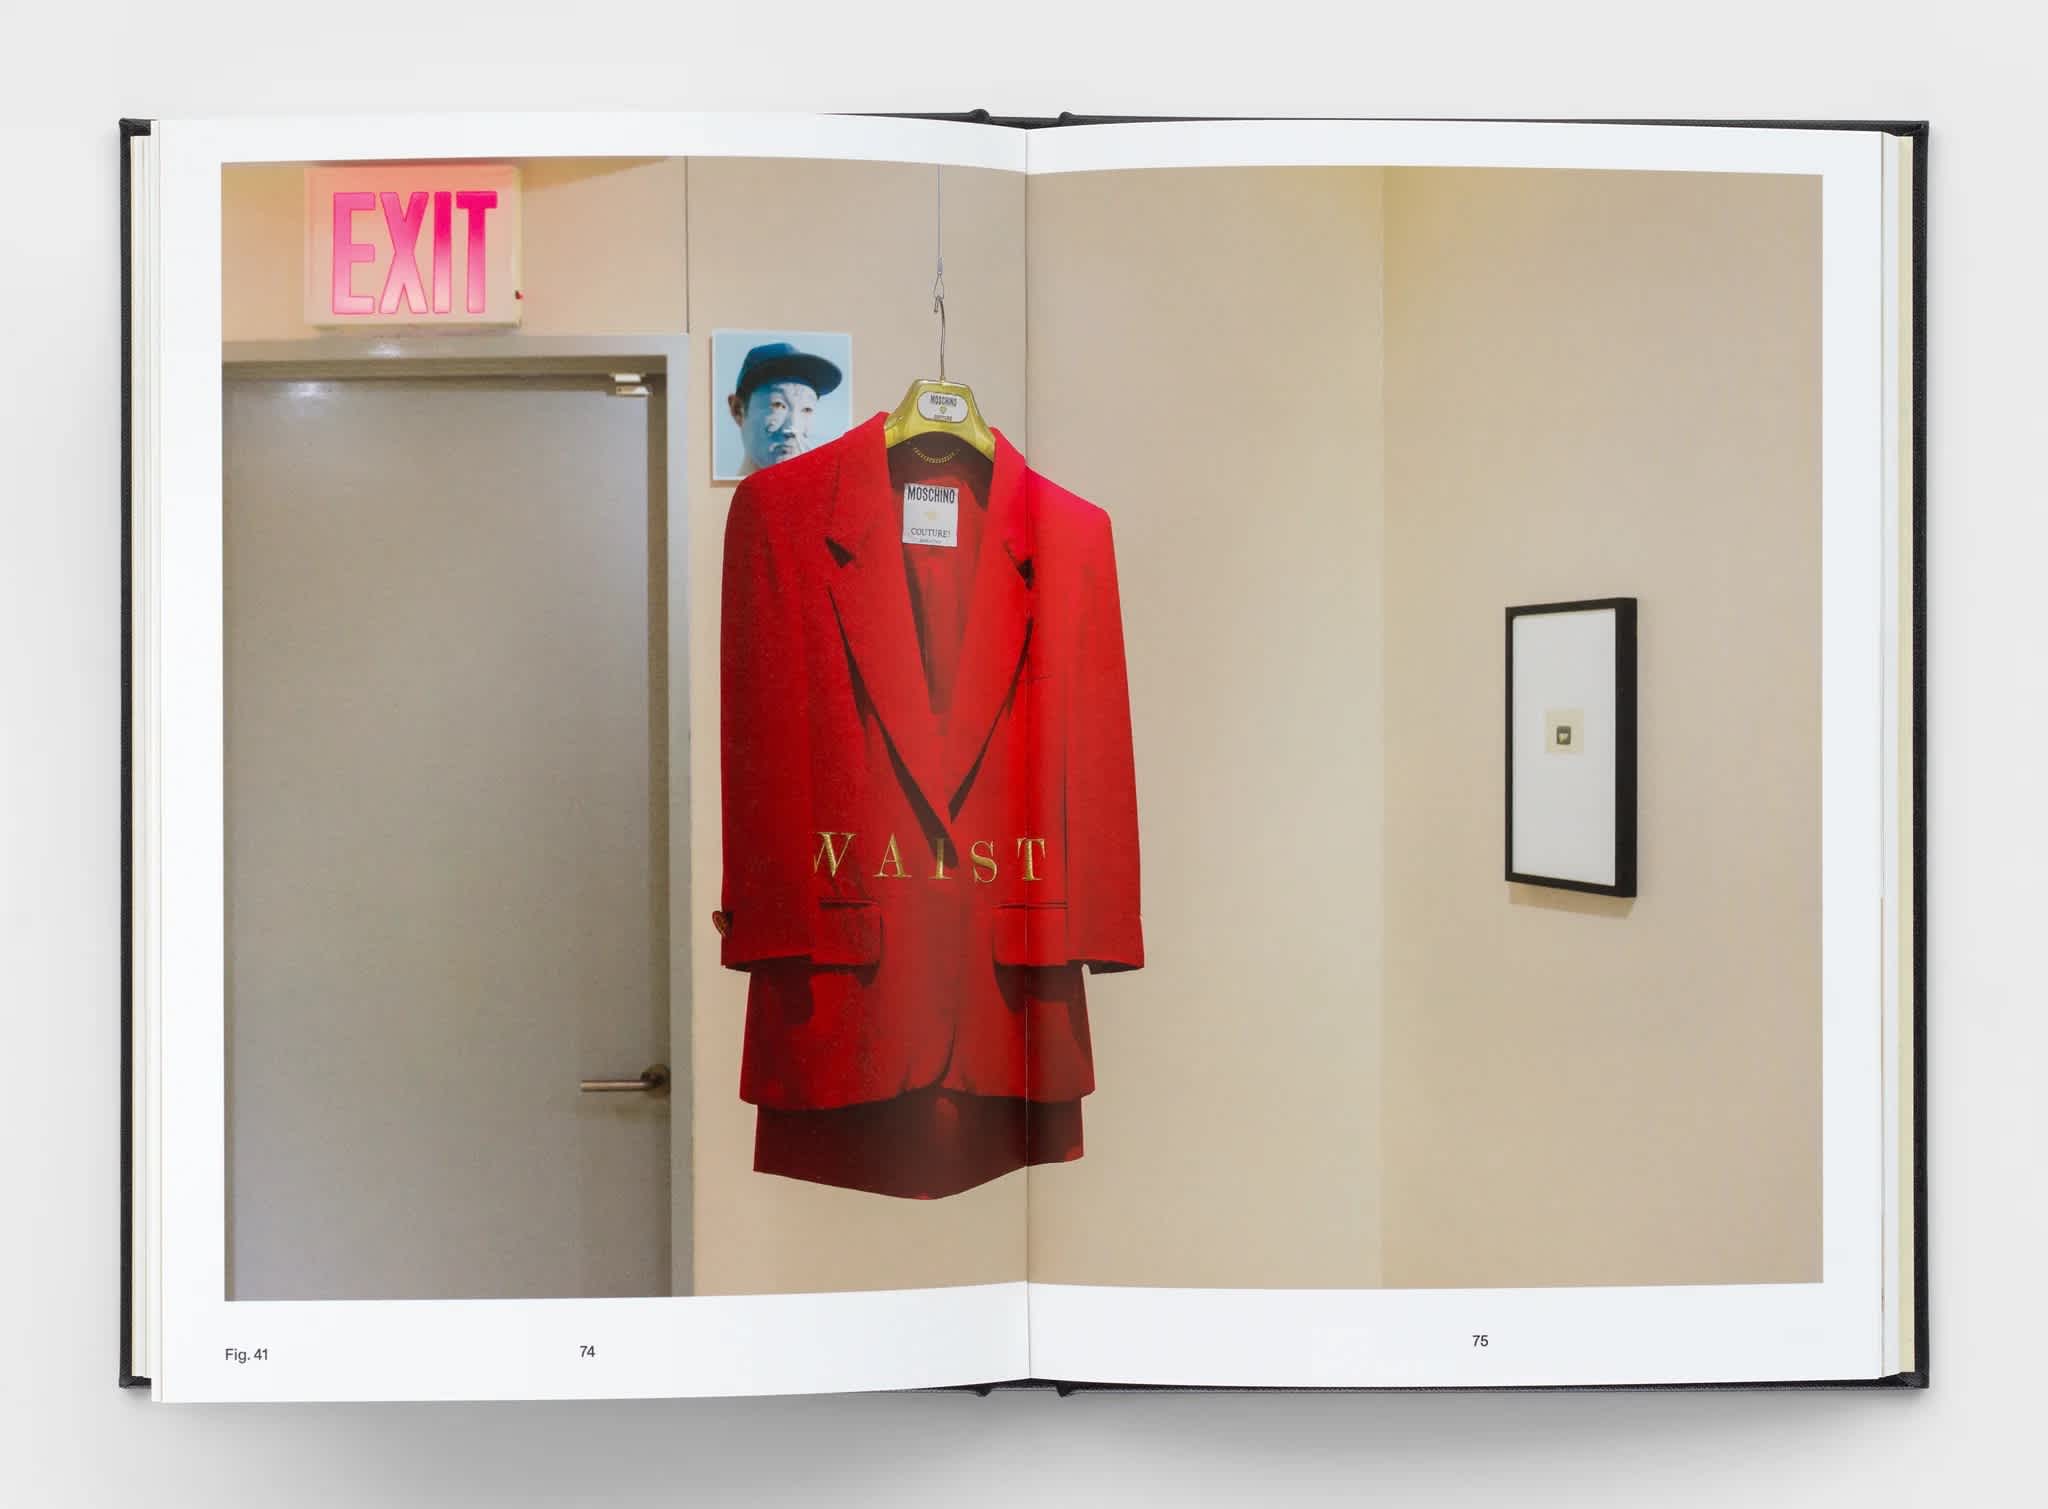 Open book with centerfold exhibition image. A red coat hangs in the center. A frame hangs on the wall to the right of the coat. A door and exit sign above it, are to the left of the coat.